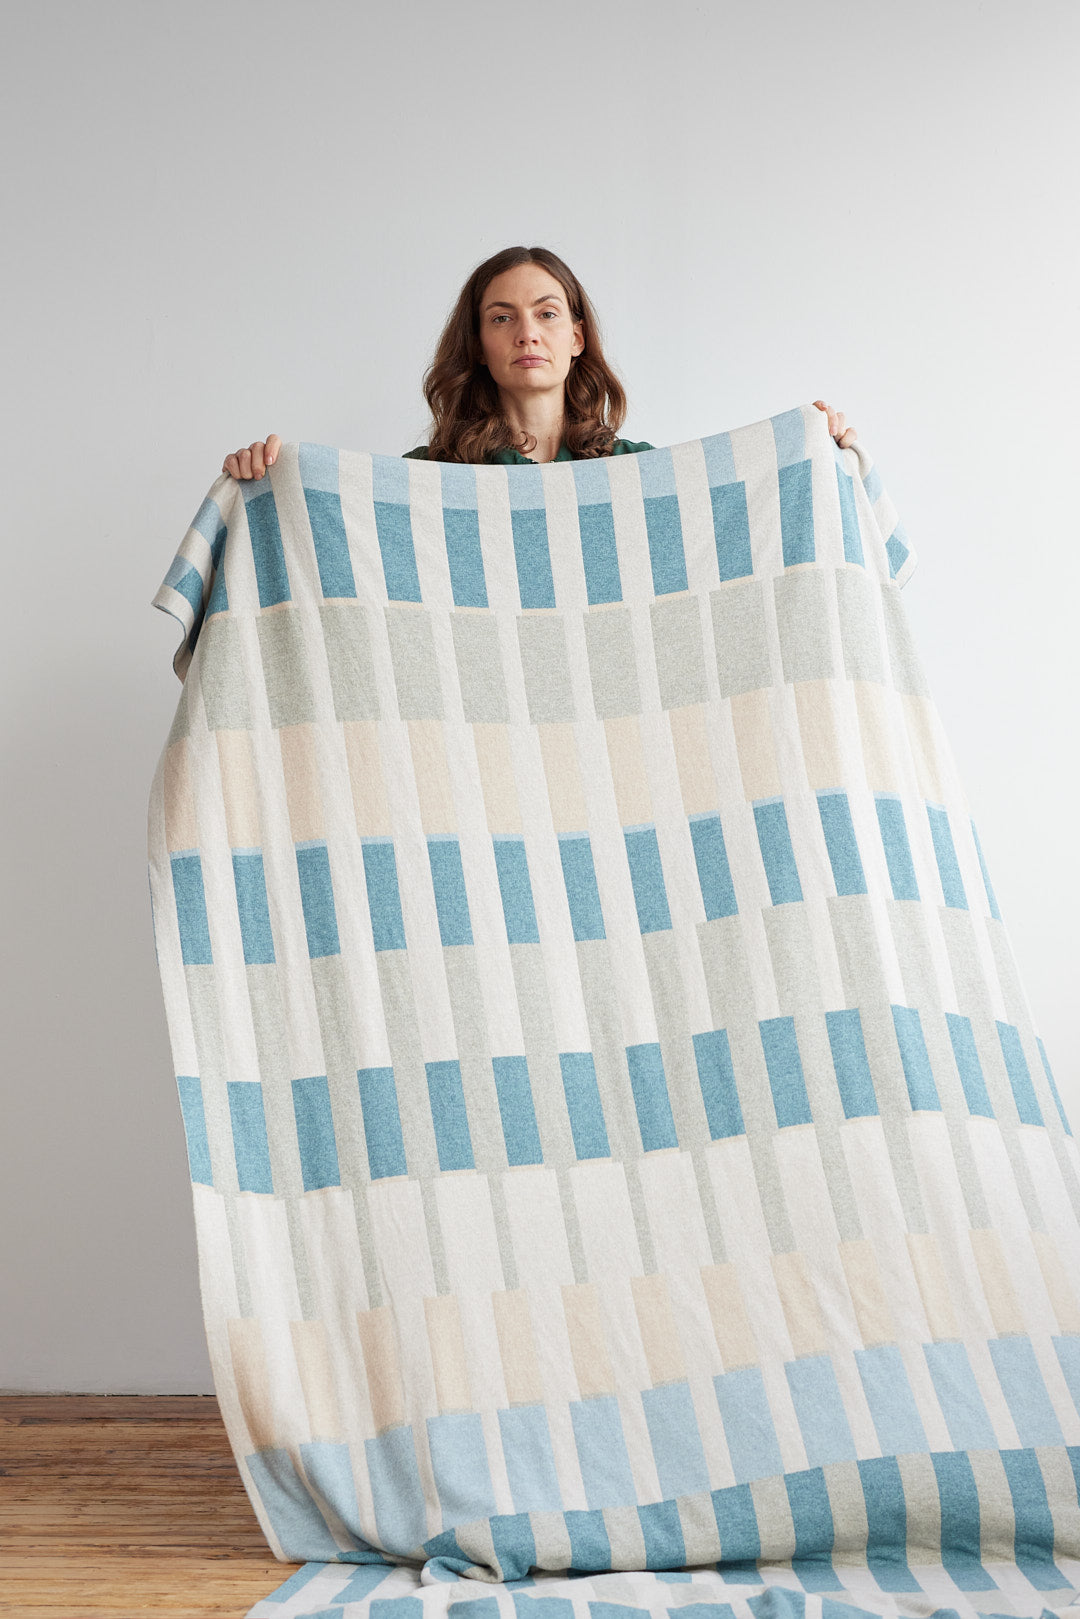 Bedthrow "Harbour" - North Sea + Oatmeal